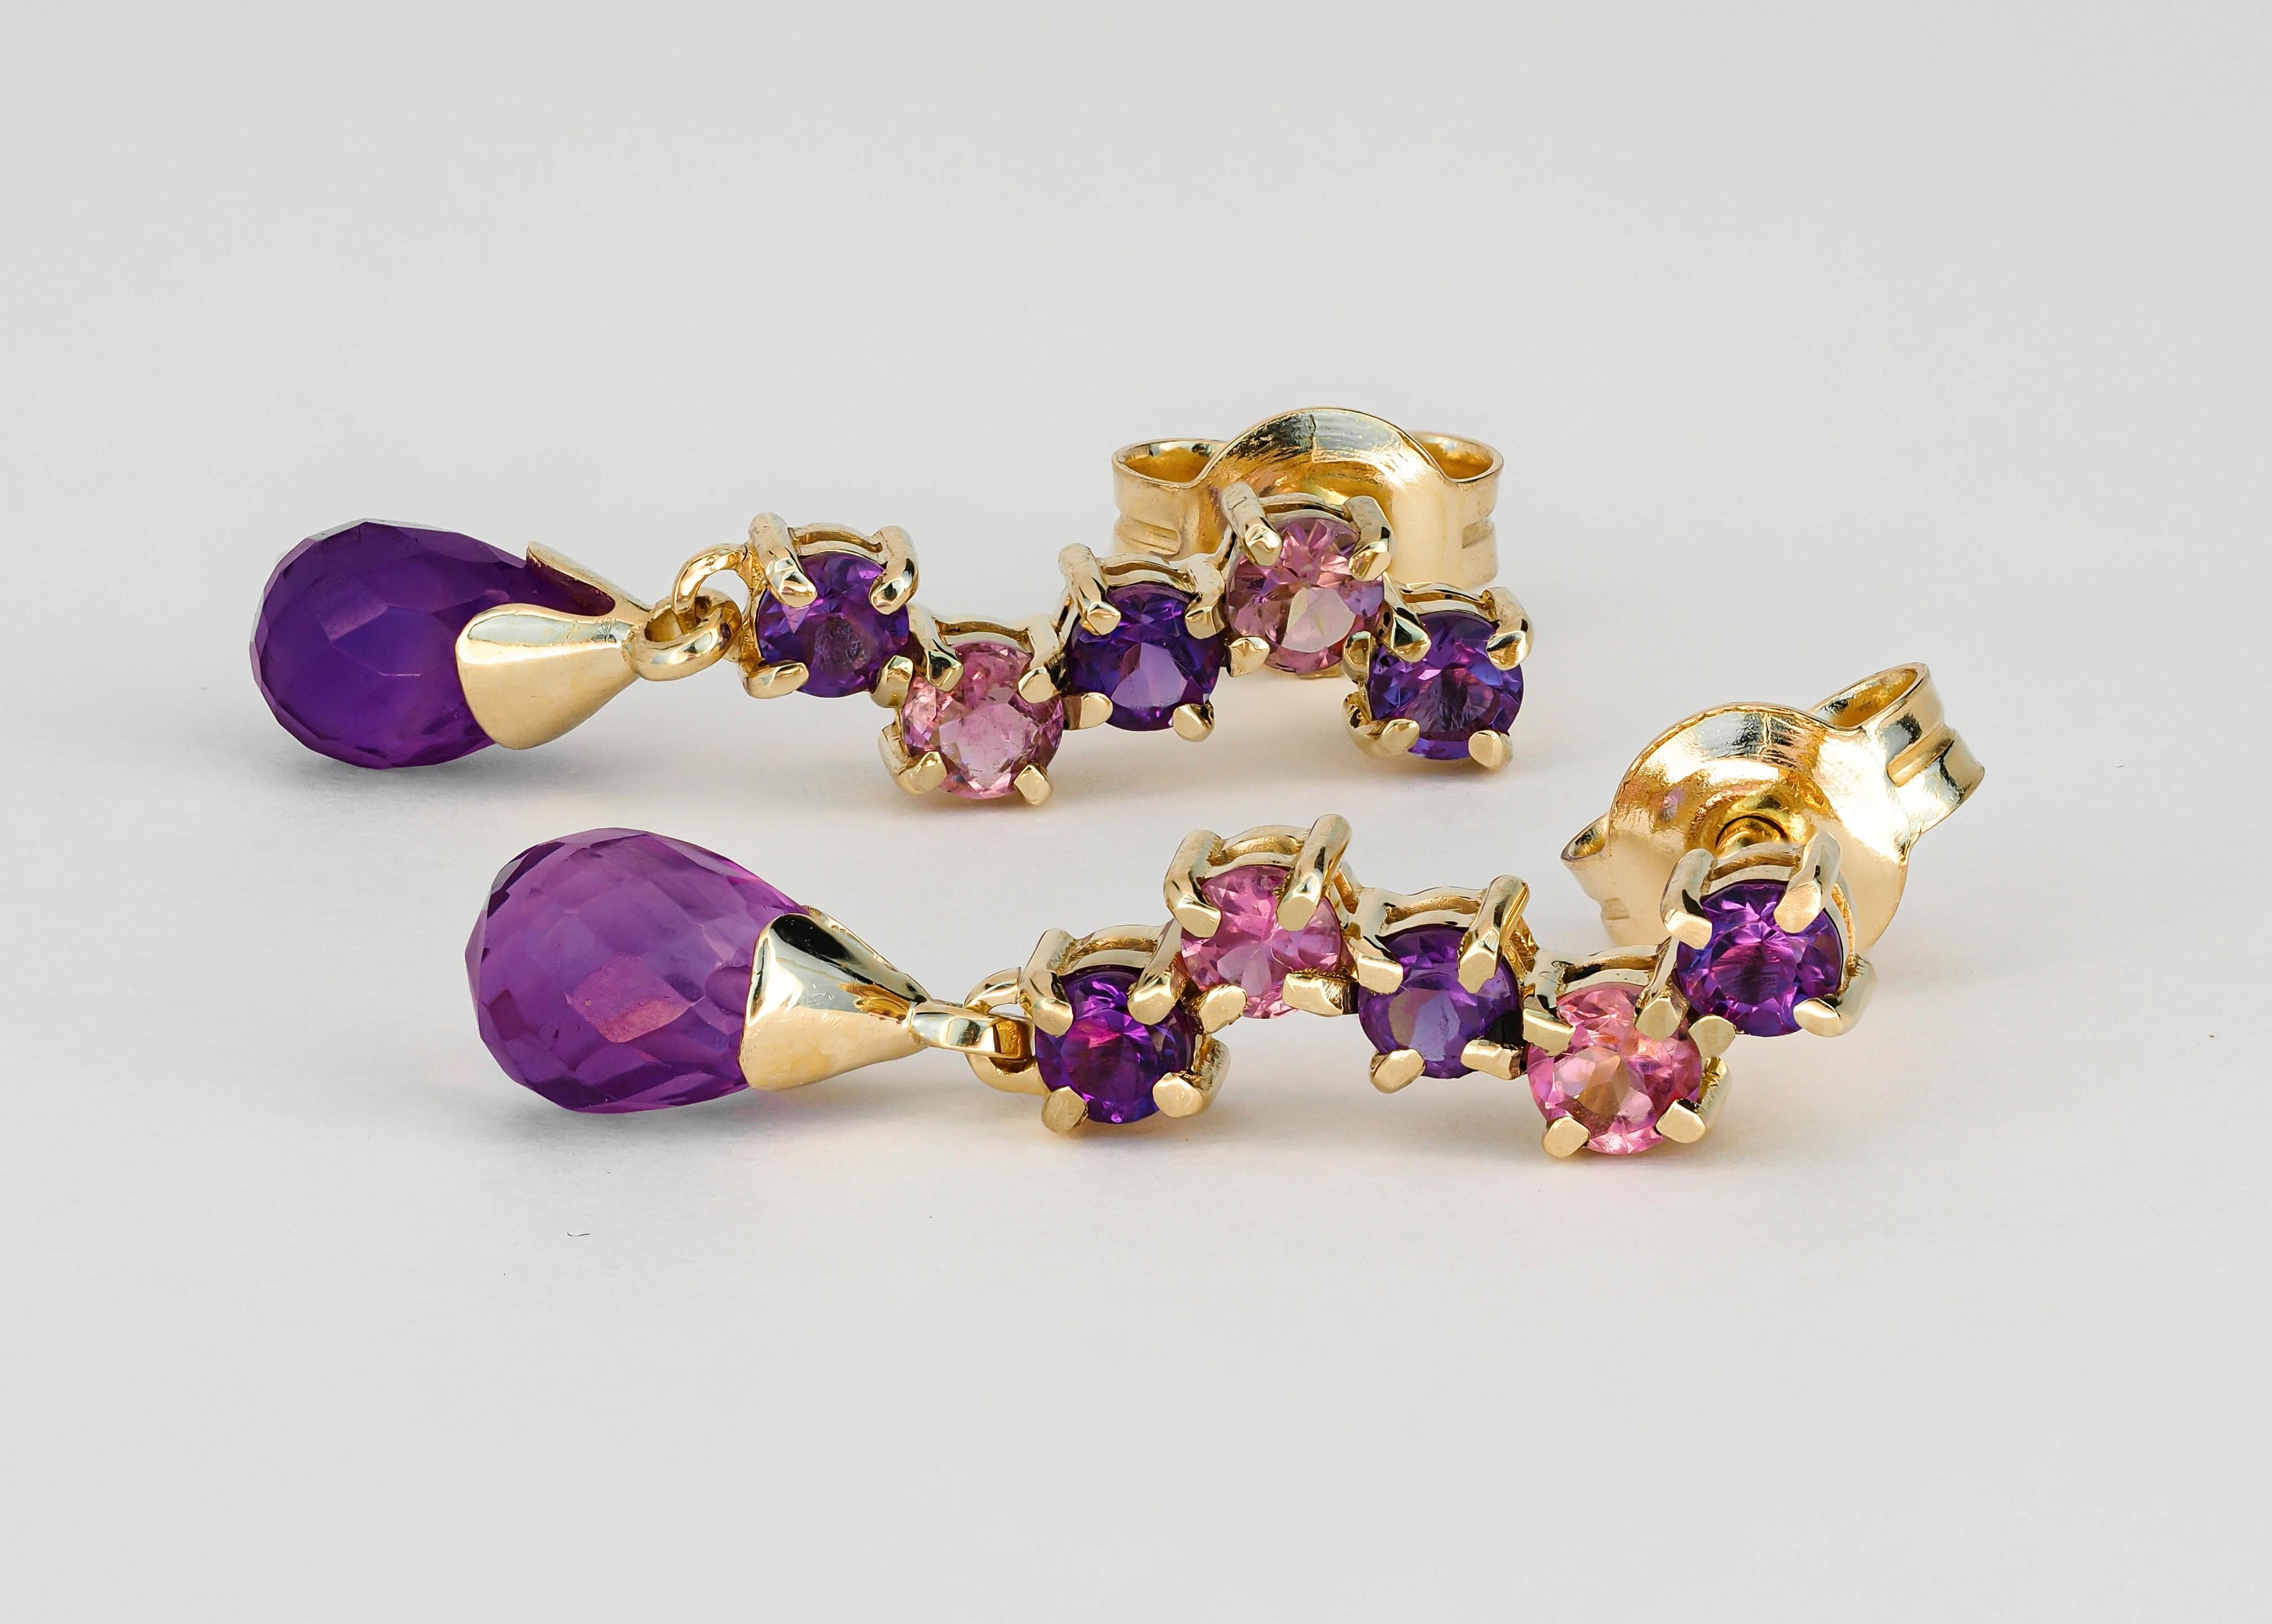 Modern 14k gold earrings with amethysts and sapphires